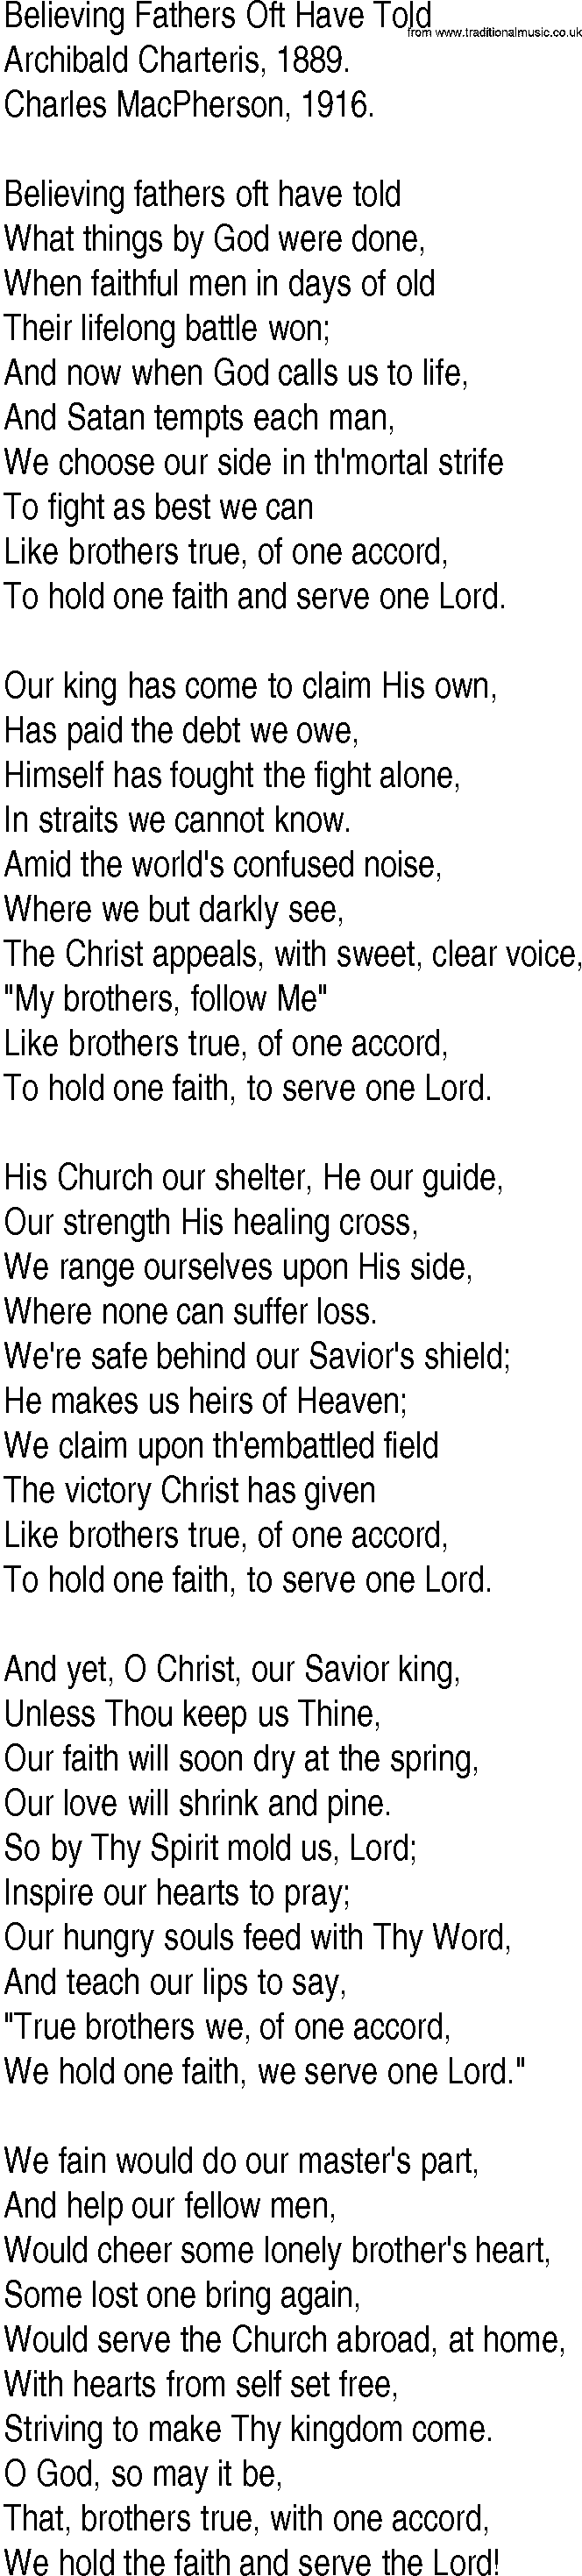 Hymn and Gospel Song: Believing Fathers Oft Have Told by Archibald Charteris lyrics